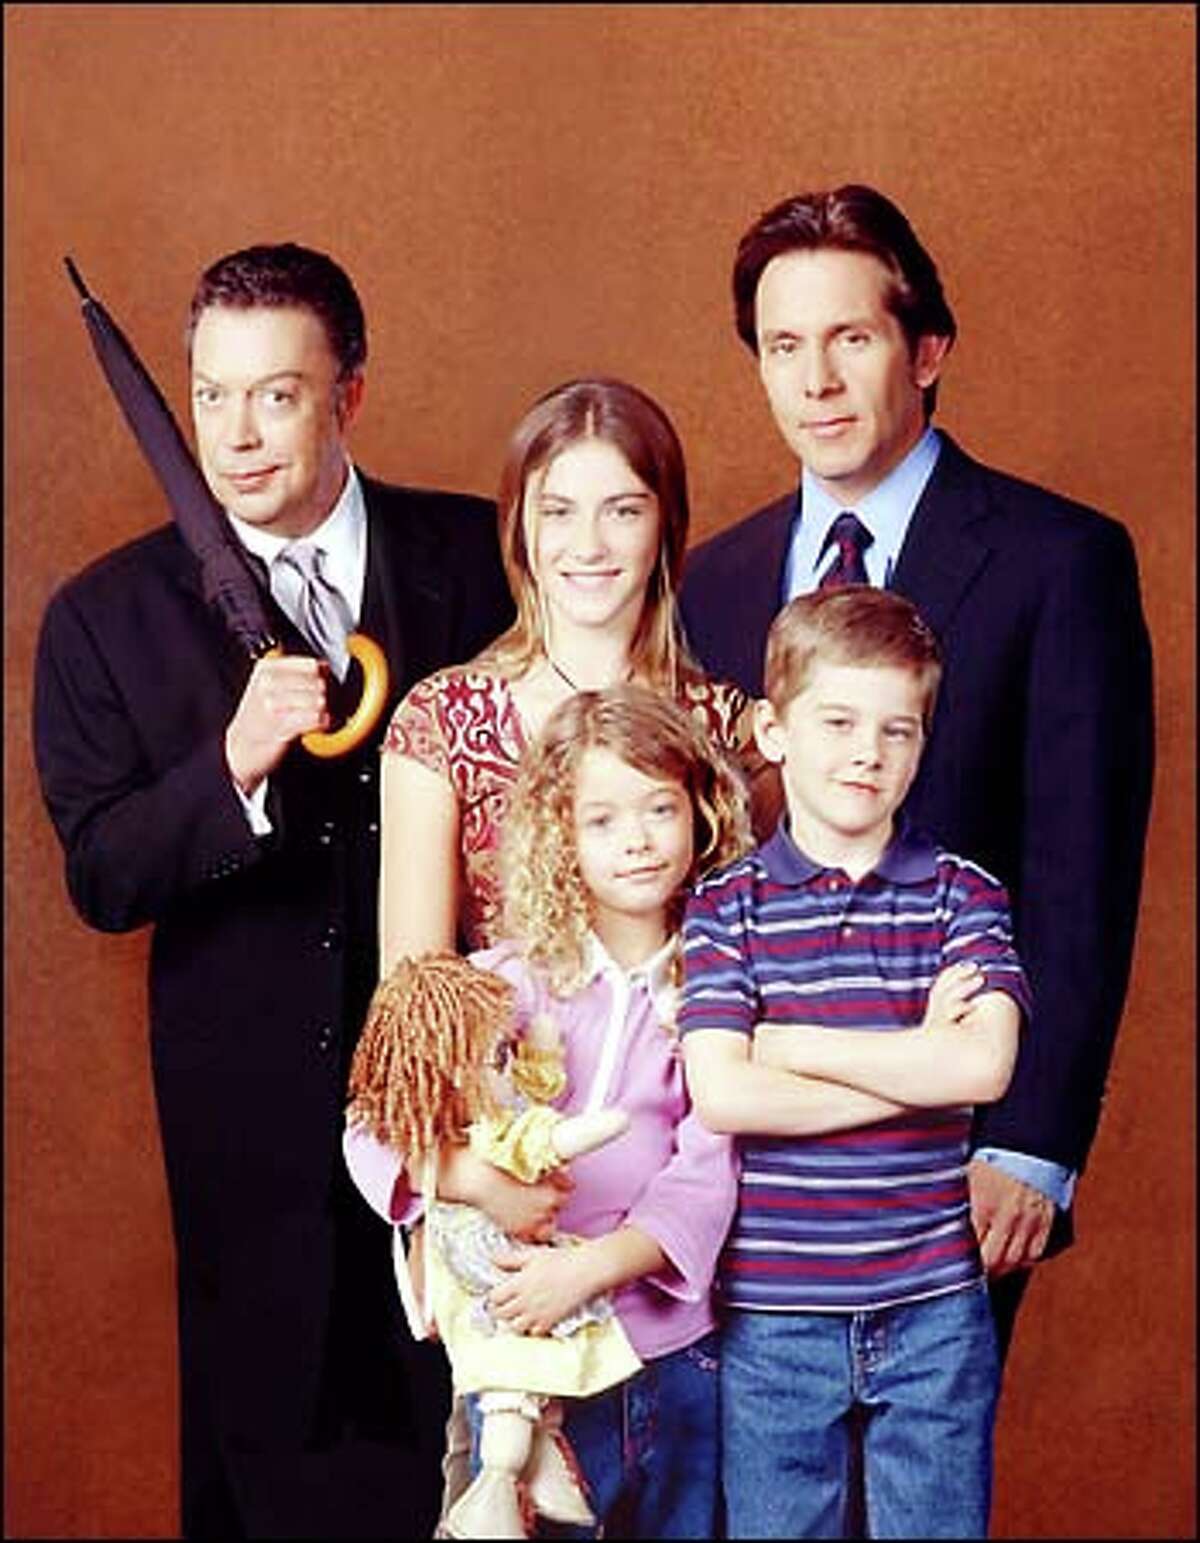 Tim Curry (rear, left) is Mr. French and Gary Cole (rear, right) is Uncle Bill in The WB's remake of "Family Affair"; also starring (front, left to right) Sasha Pieterse as Buffy, Luke Benward as Jody and Caitlin Wachs (rear, center) as Sissy.